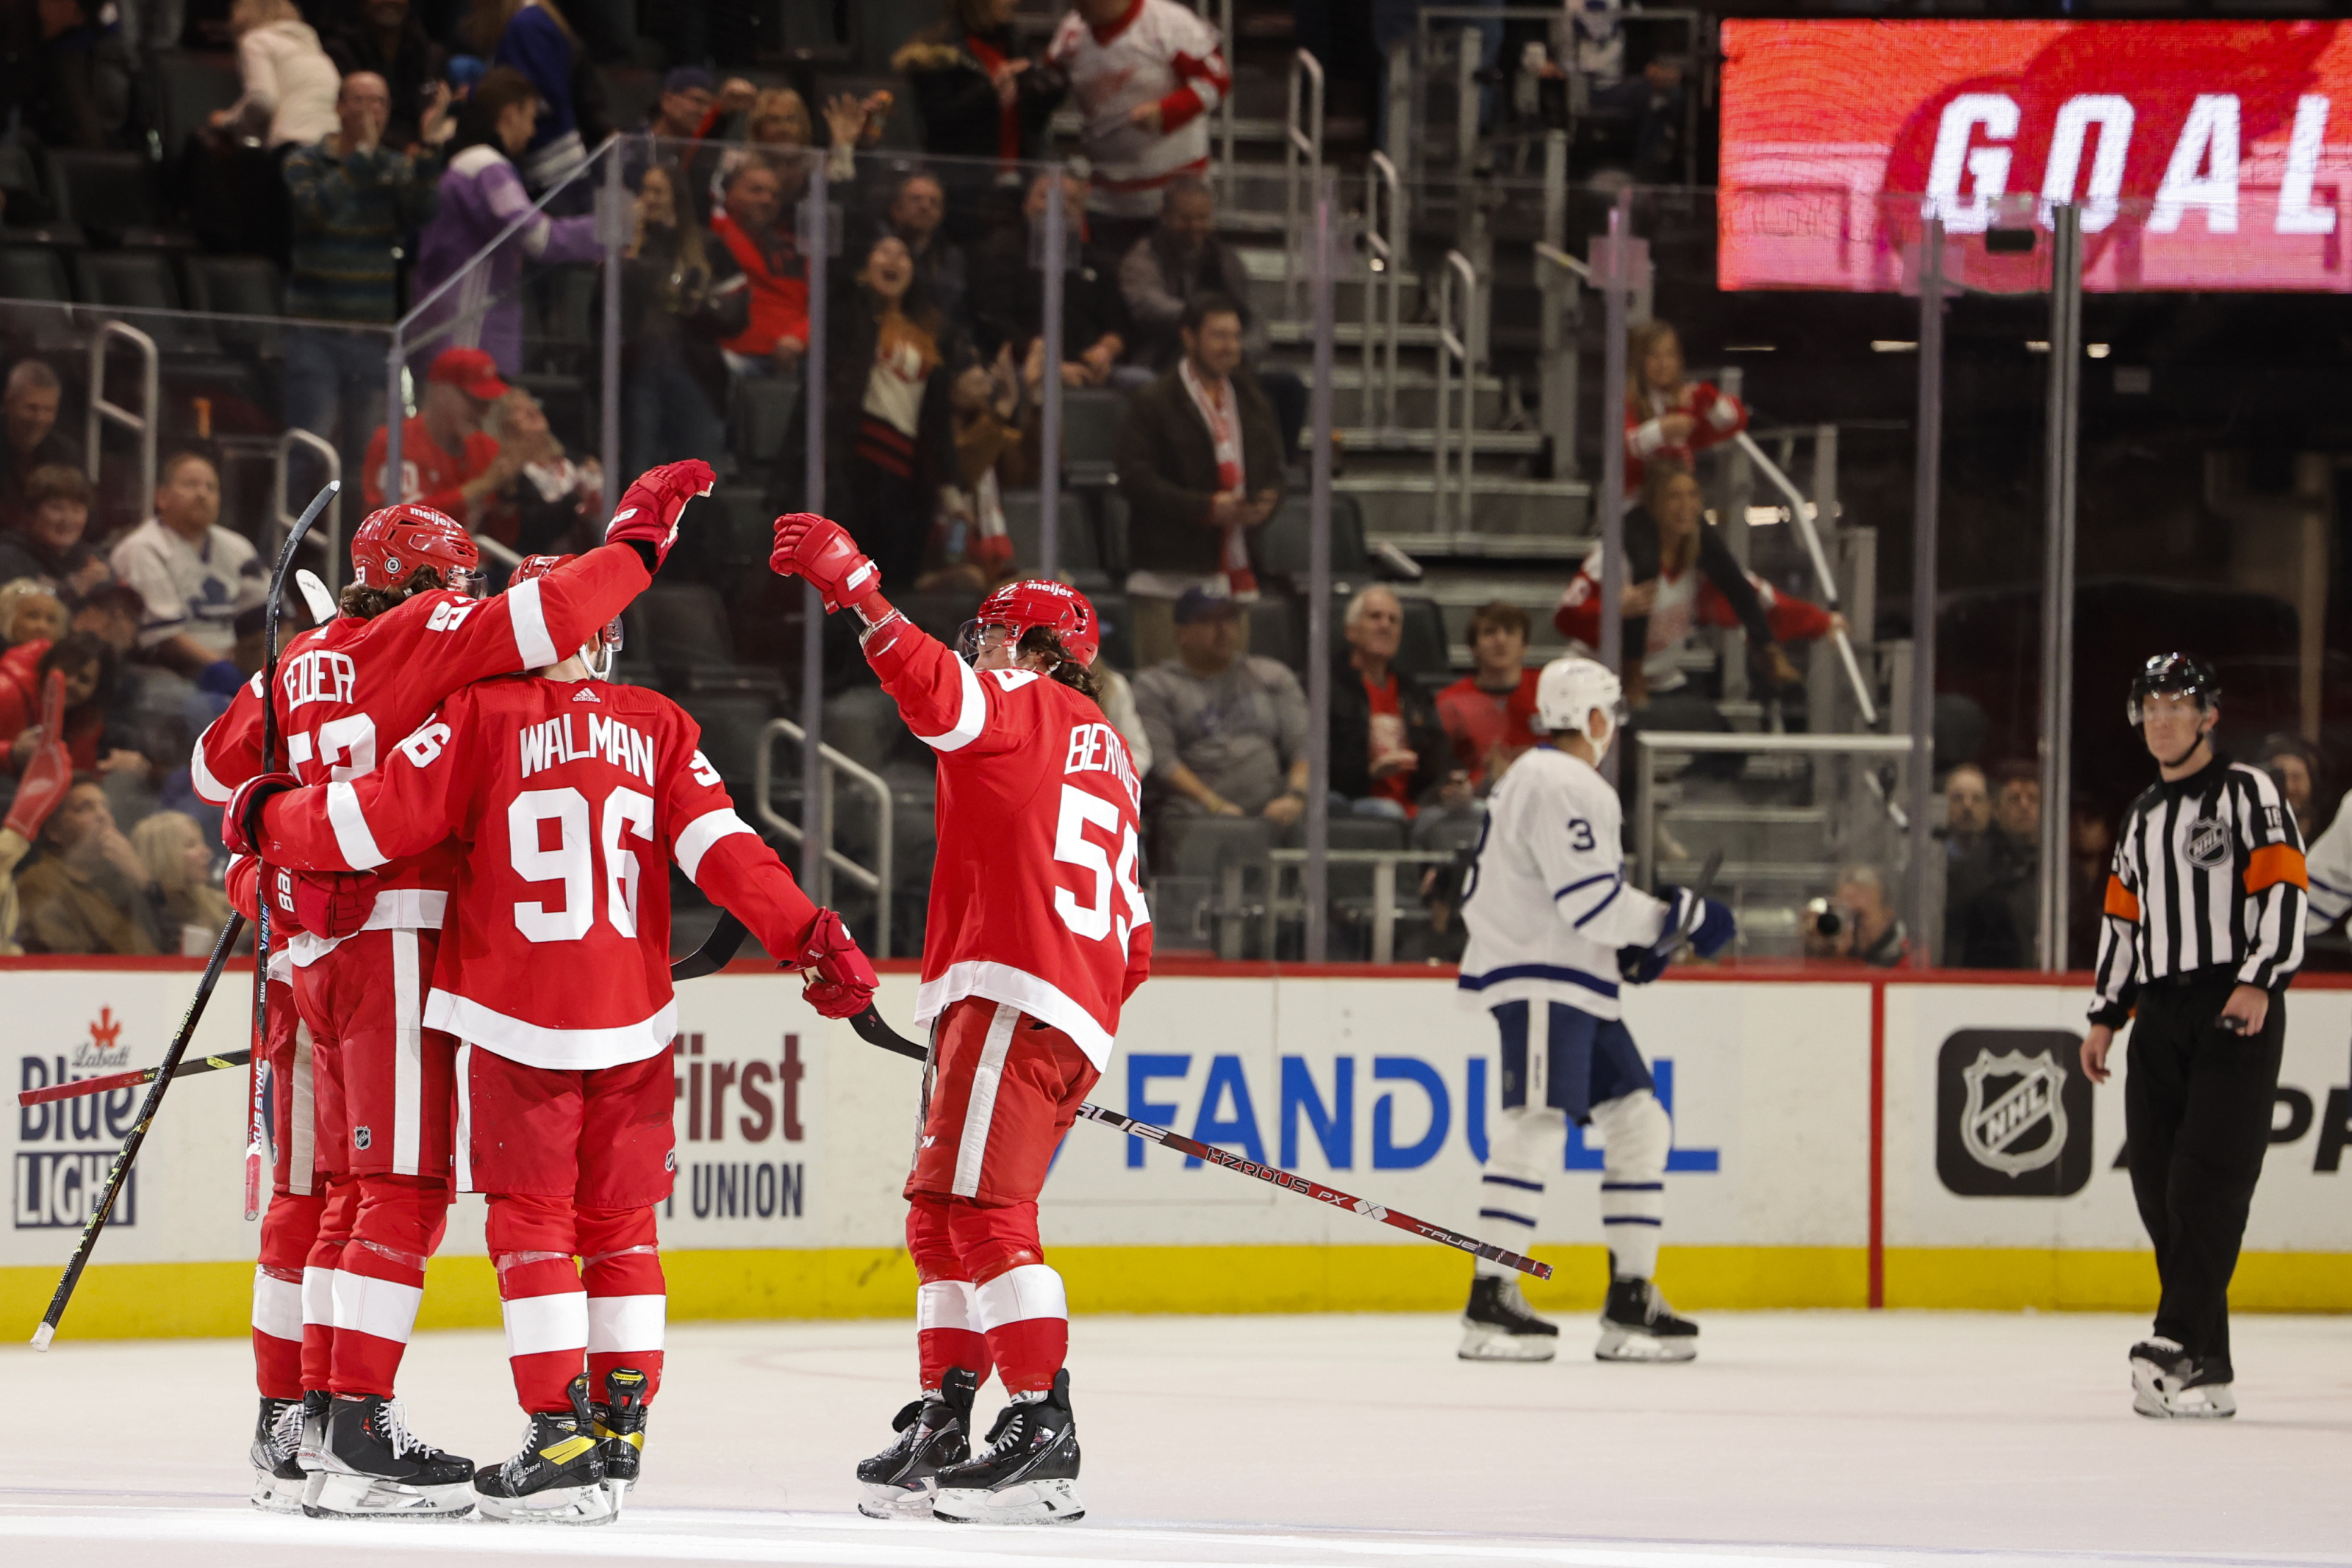 Defenseman Seider has 4 assists, Red Wings beat Jets 7-5 - Seattle Sports